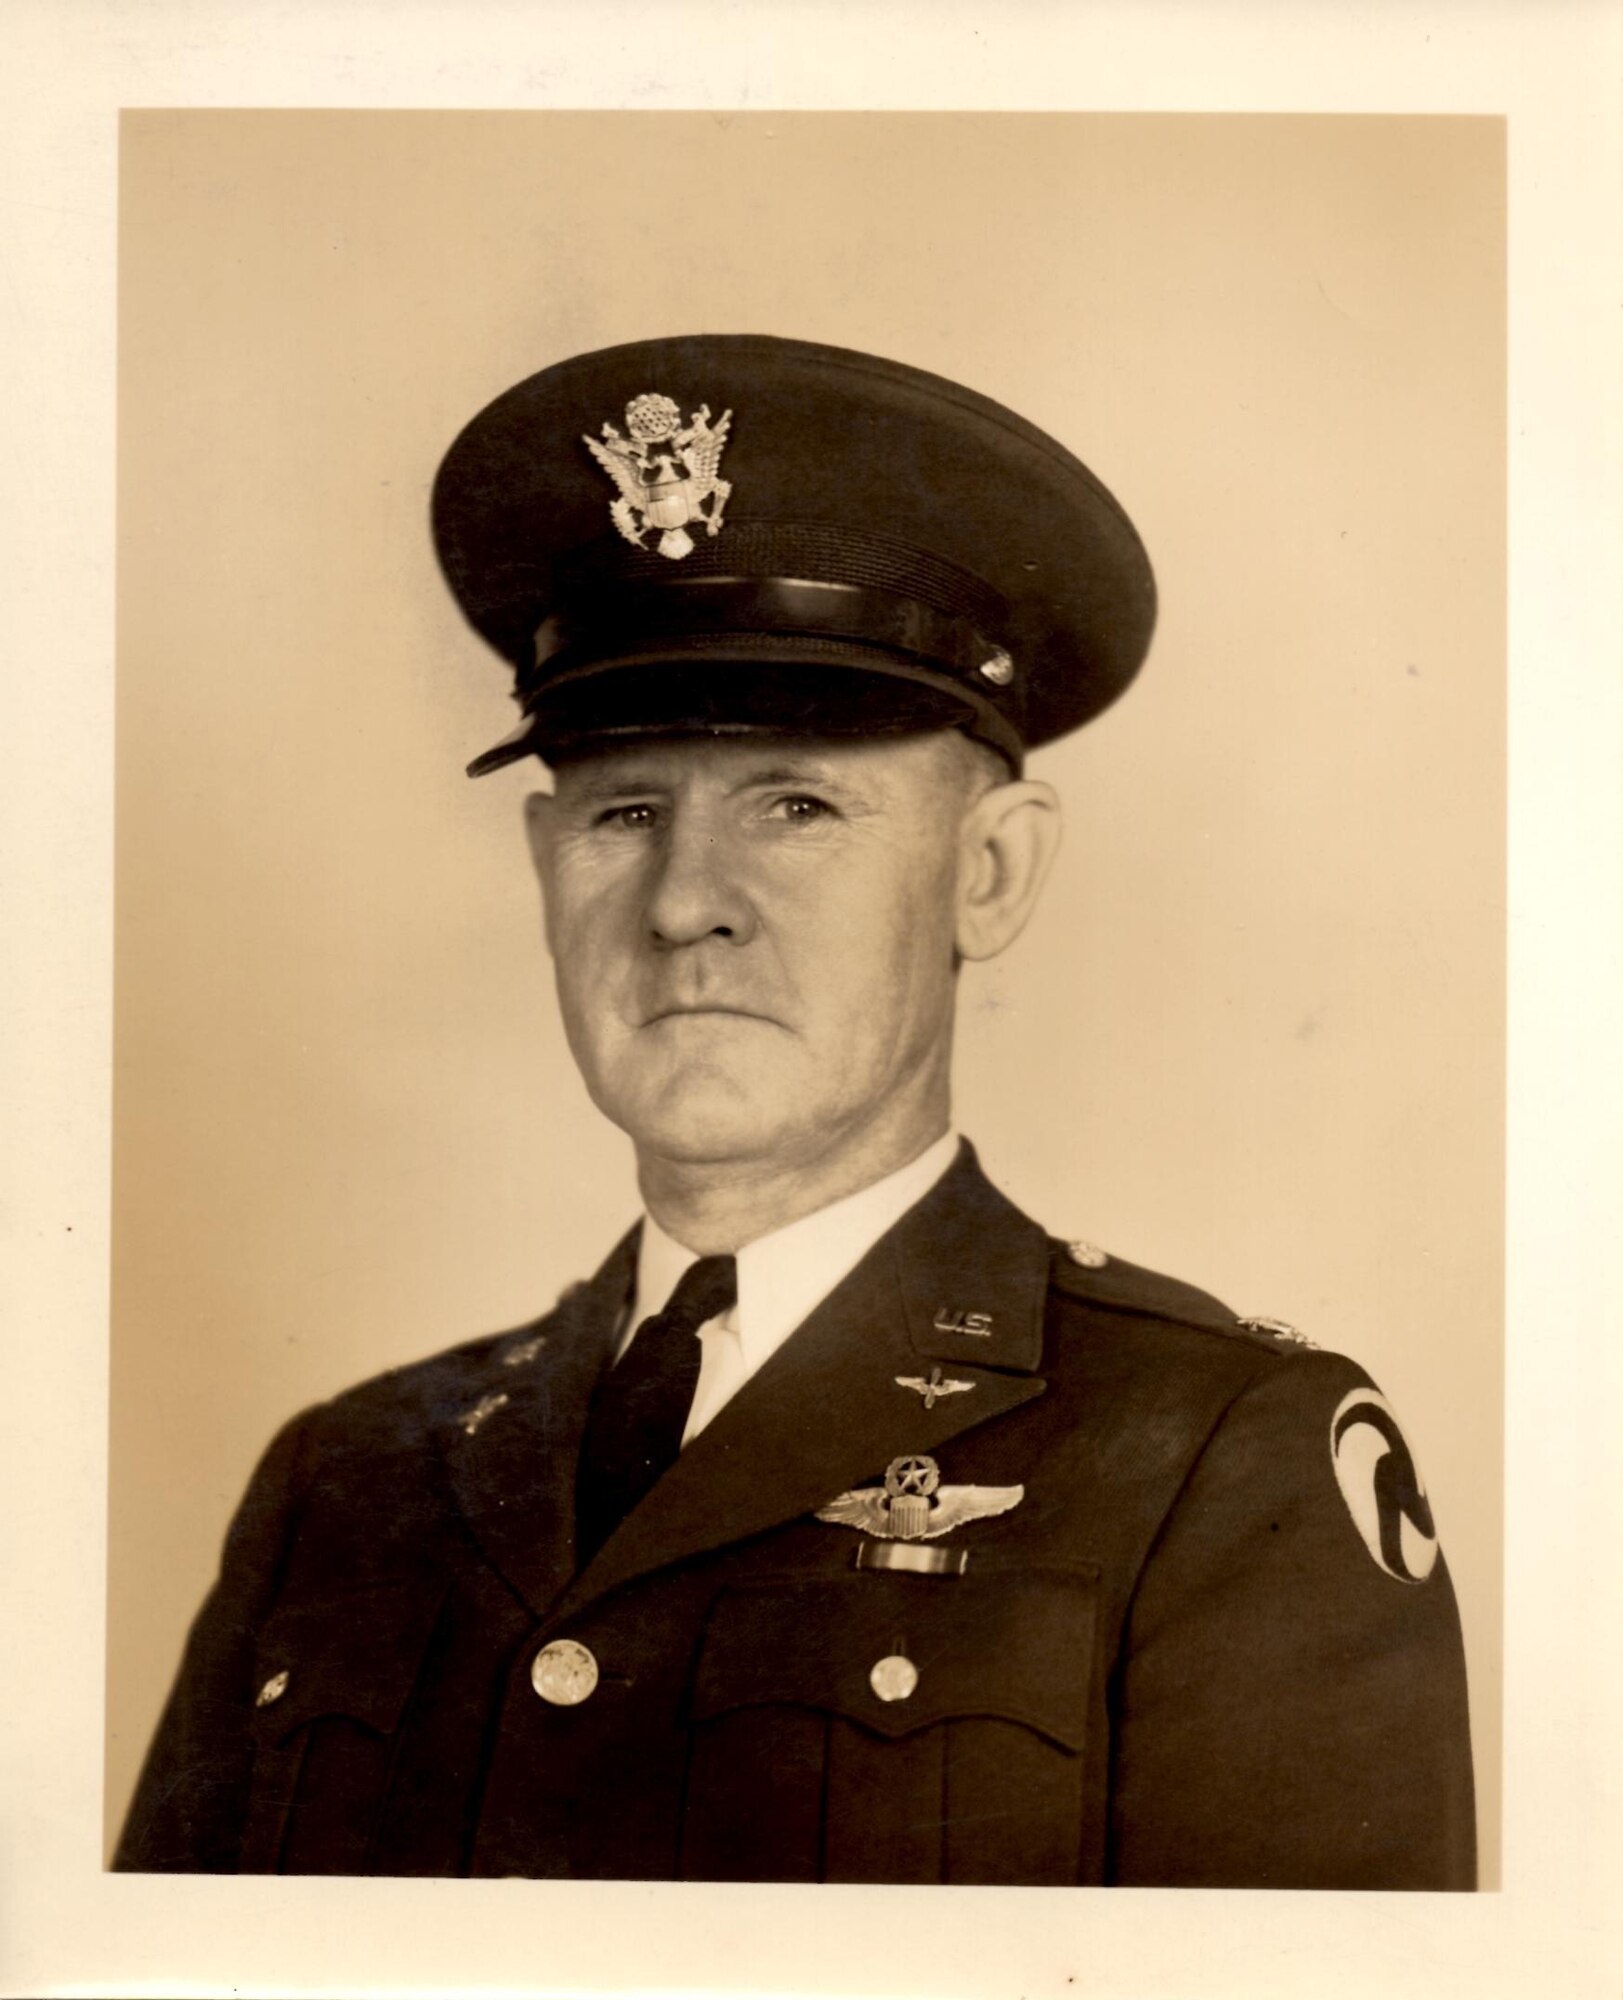 Colonel Joseph L. Stromme, US Army Air Corps, who declared Portland Army Air Base activated on Thursday, 13 March 1941, was the first commander of the base. A native of Volga, South Dakota, he graduated from Hamline University in St. Paul, Minnesota, before joining the Army at Fort Snelling, Minnesota, in 1917. He was commissioned as a 2nd Lt., Infantry, and transferred to the Air Service at Kelly Field, Texas, in December, 1917. He served three tours in the Office of the Chief of the Air Corps, four years on staff in the War Department, graduated from the Army Industrial College and Harvard Graduate School of Business Administration.  Stromme served three years as the Air Corps industrial planning officer on the west coast at March Field, California, before taking command at Portland. (142FW History Archives, Robert Hall Collection)